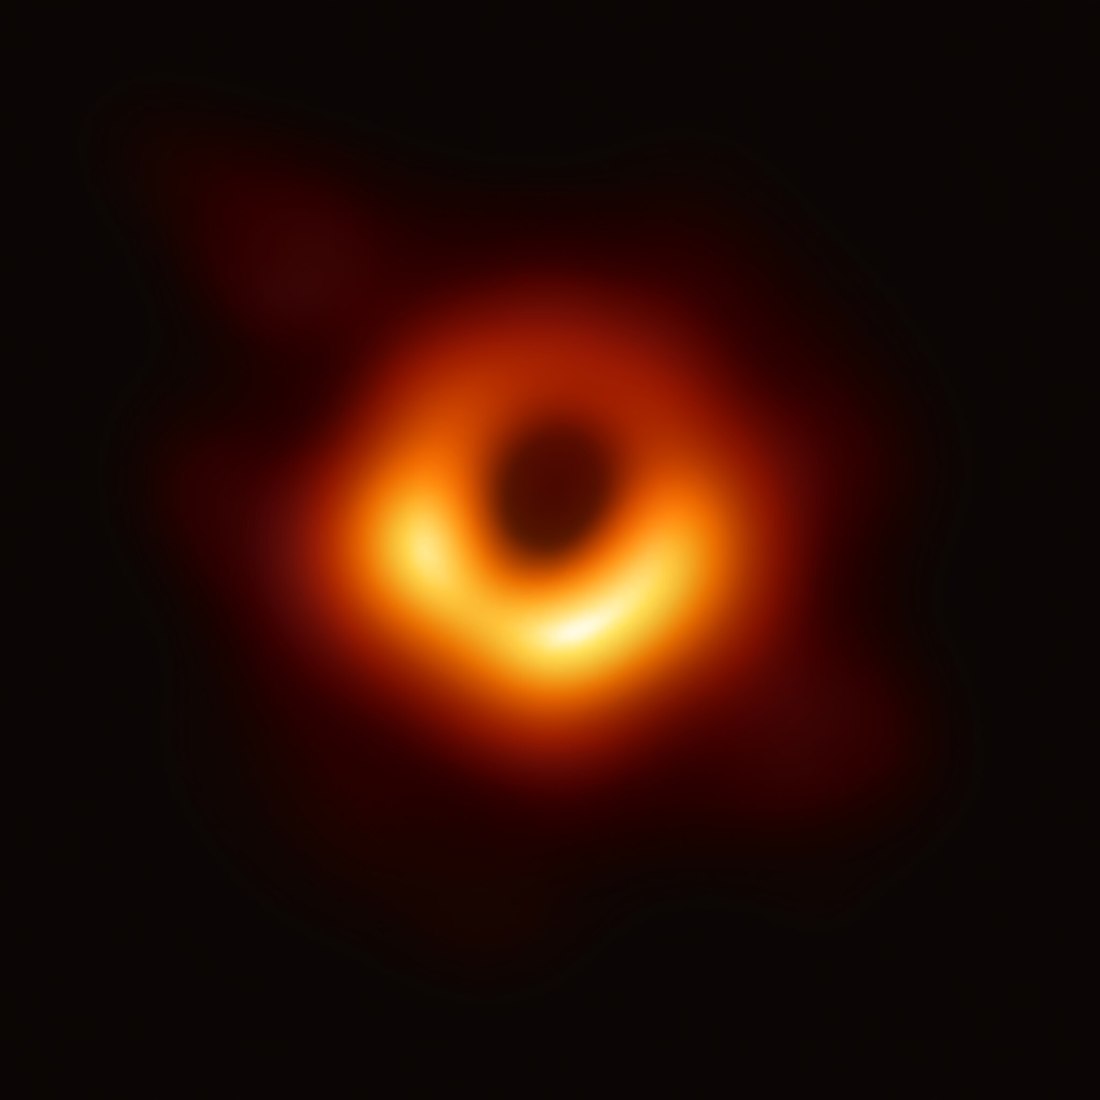 Black hole - Messier 87, a dark center surrounded by the light of an accretion disk